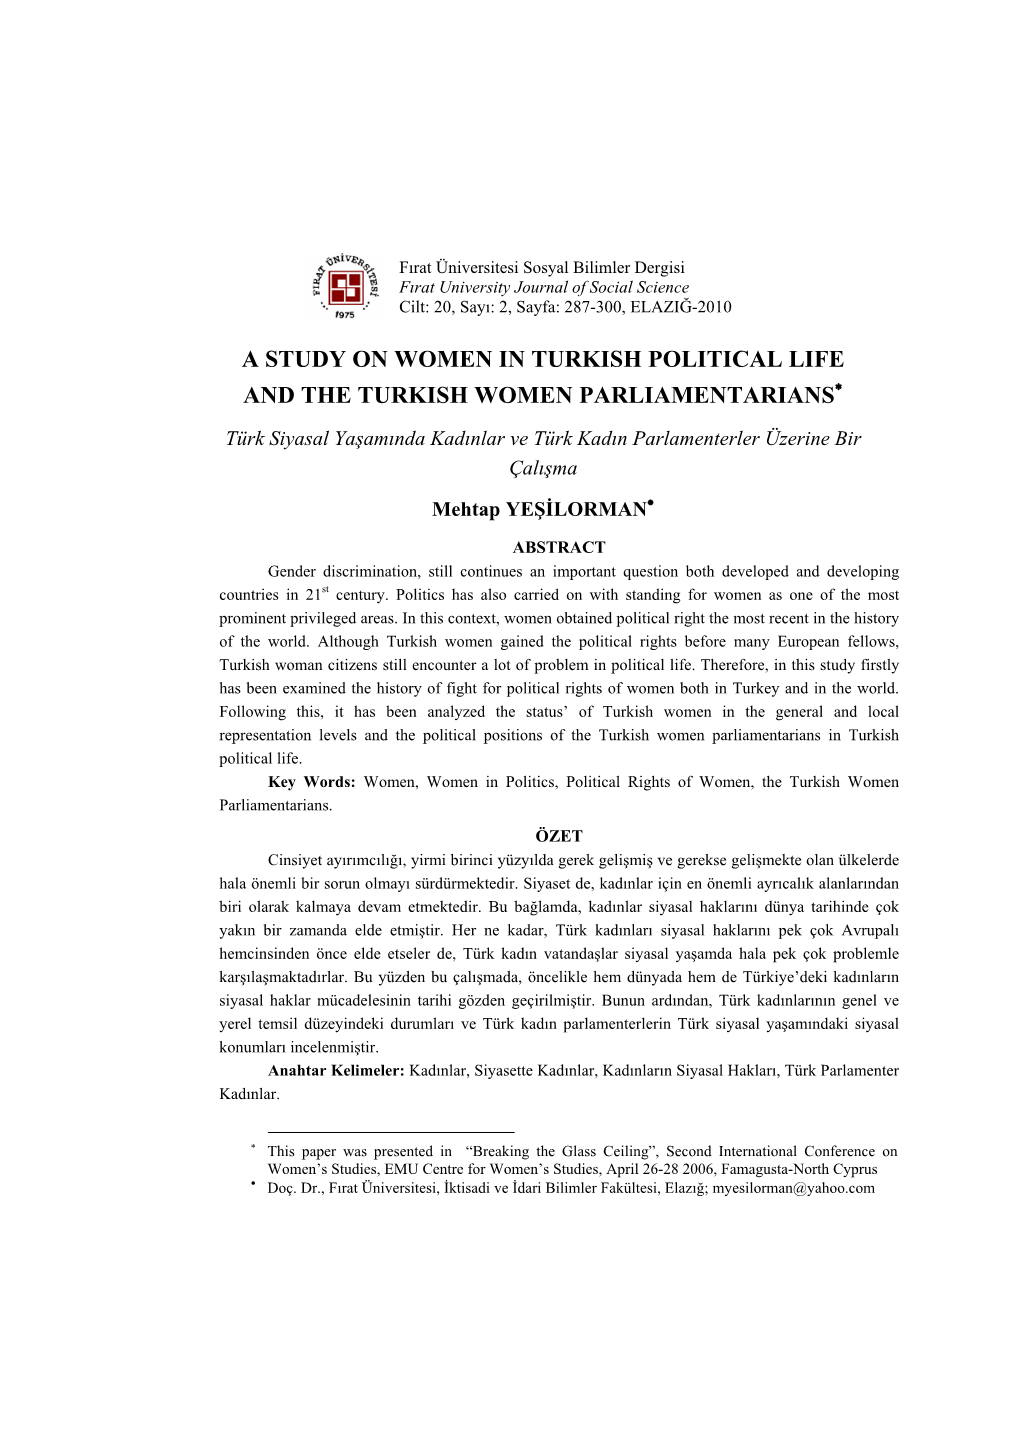 A Study on Women in Turkish Political Life and the Turkish Women Parliamentarians∗